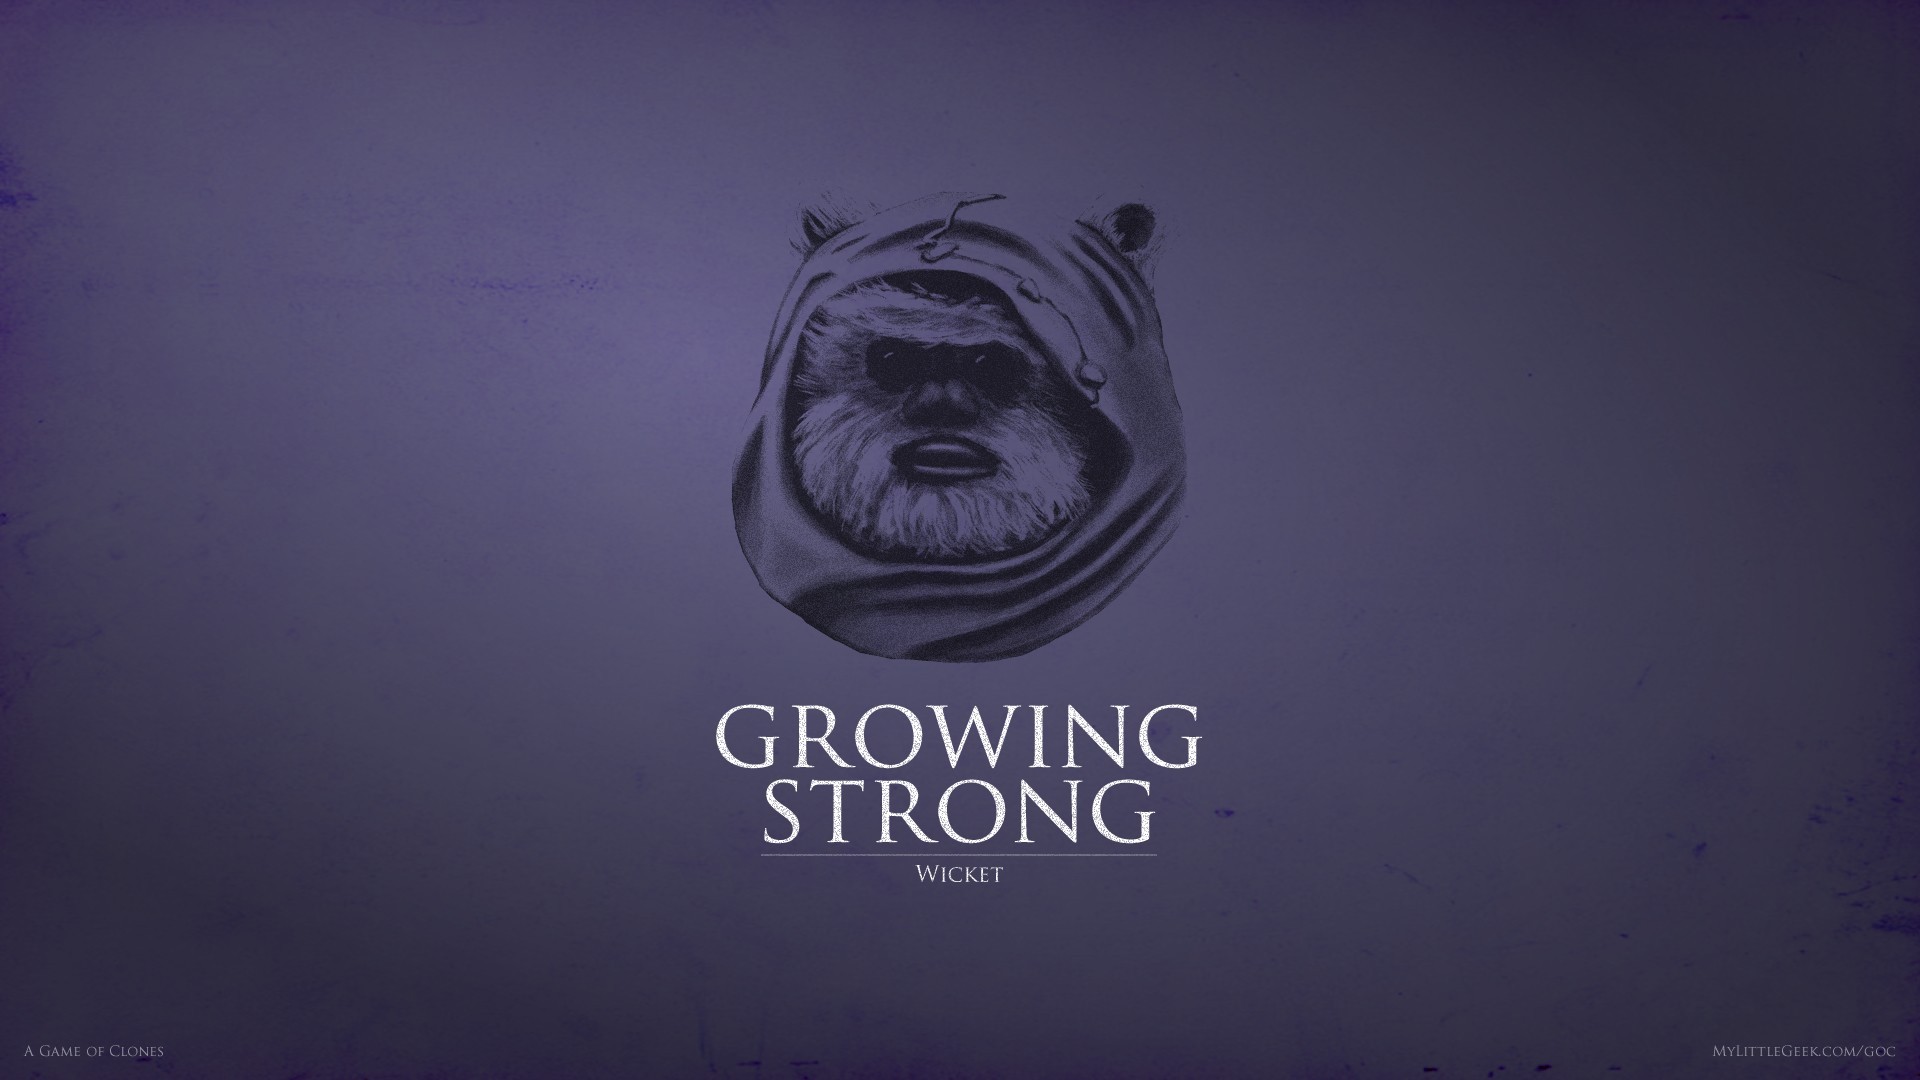 Star Wars Game Of Thrones Crossover House Tyrell Ewok 1920x1080